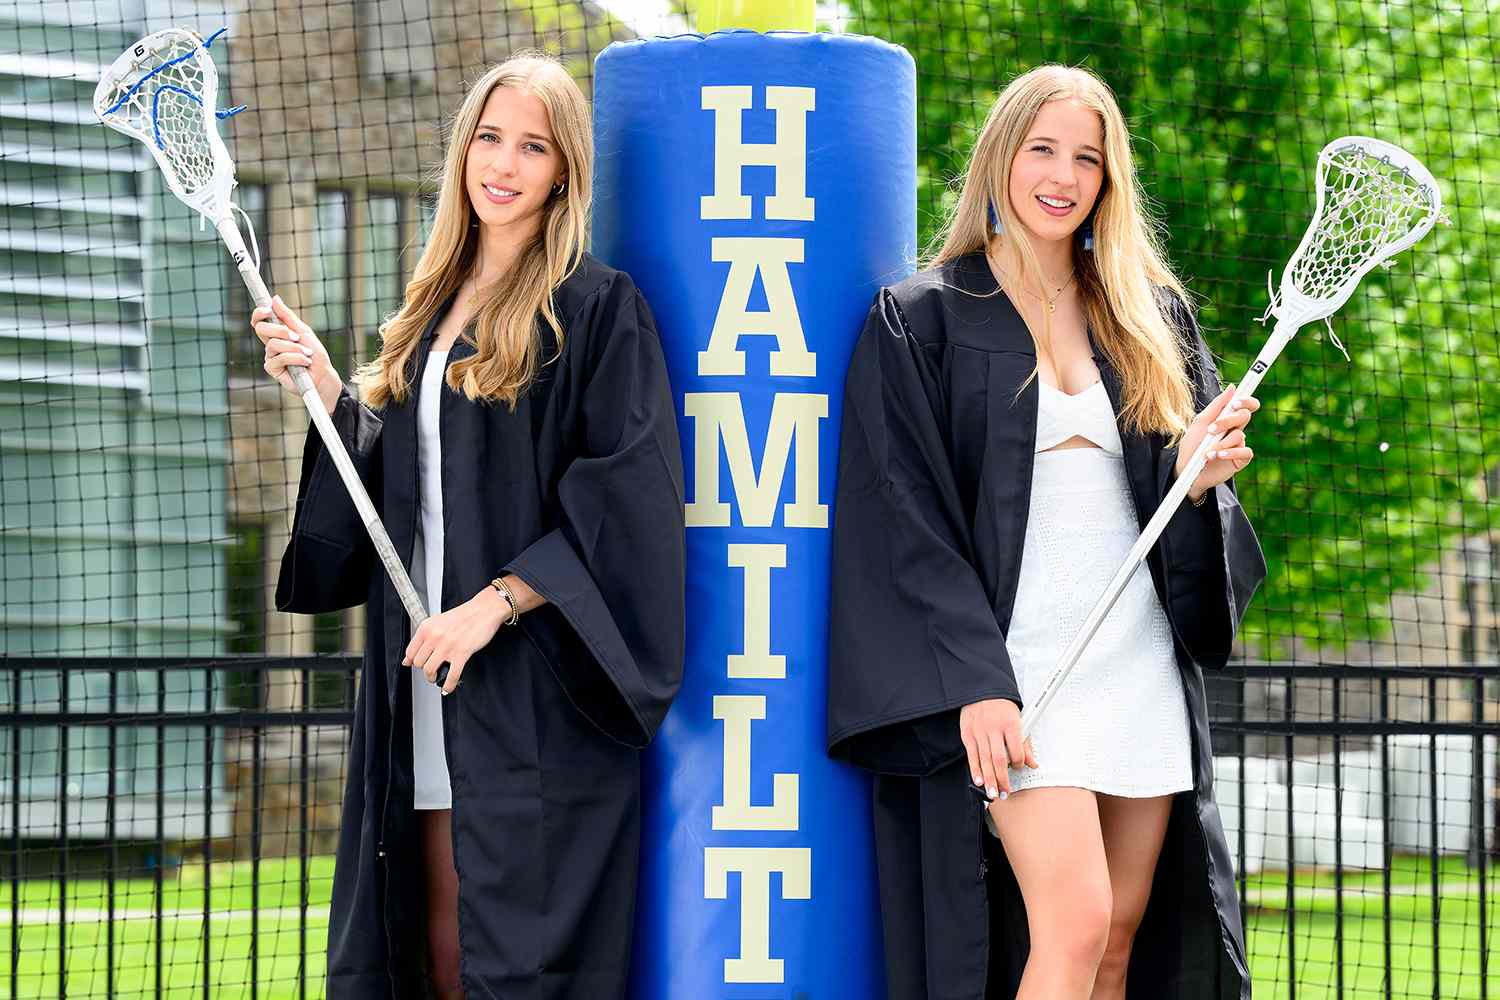 Identical Twins – with Matching 4.0 GPAs – Graduate College as Co-Valedictorians: 'It Meant So Much'